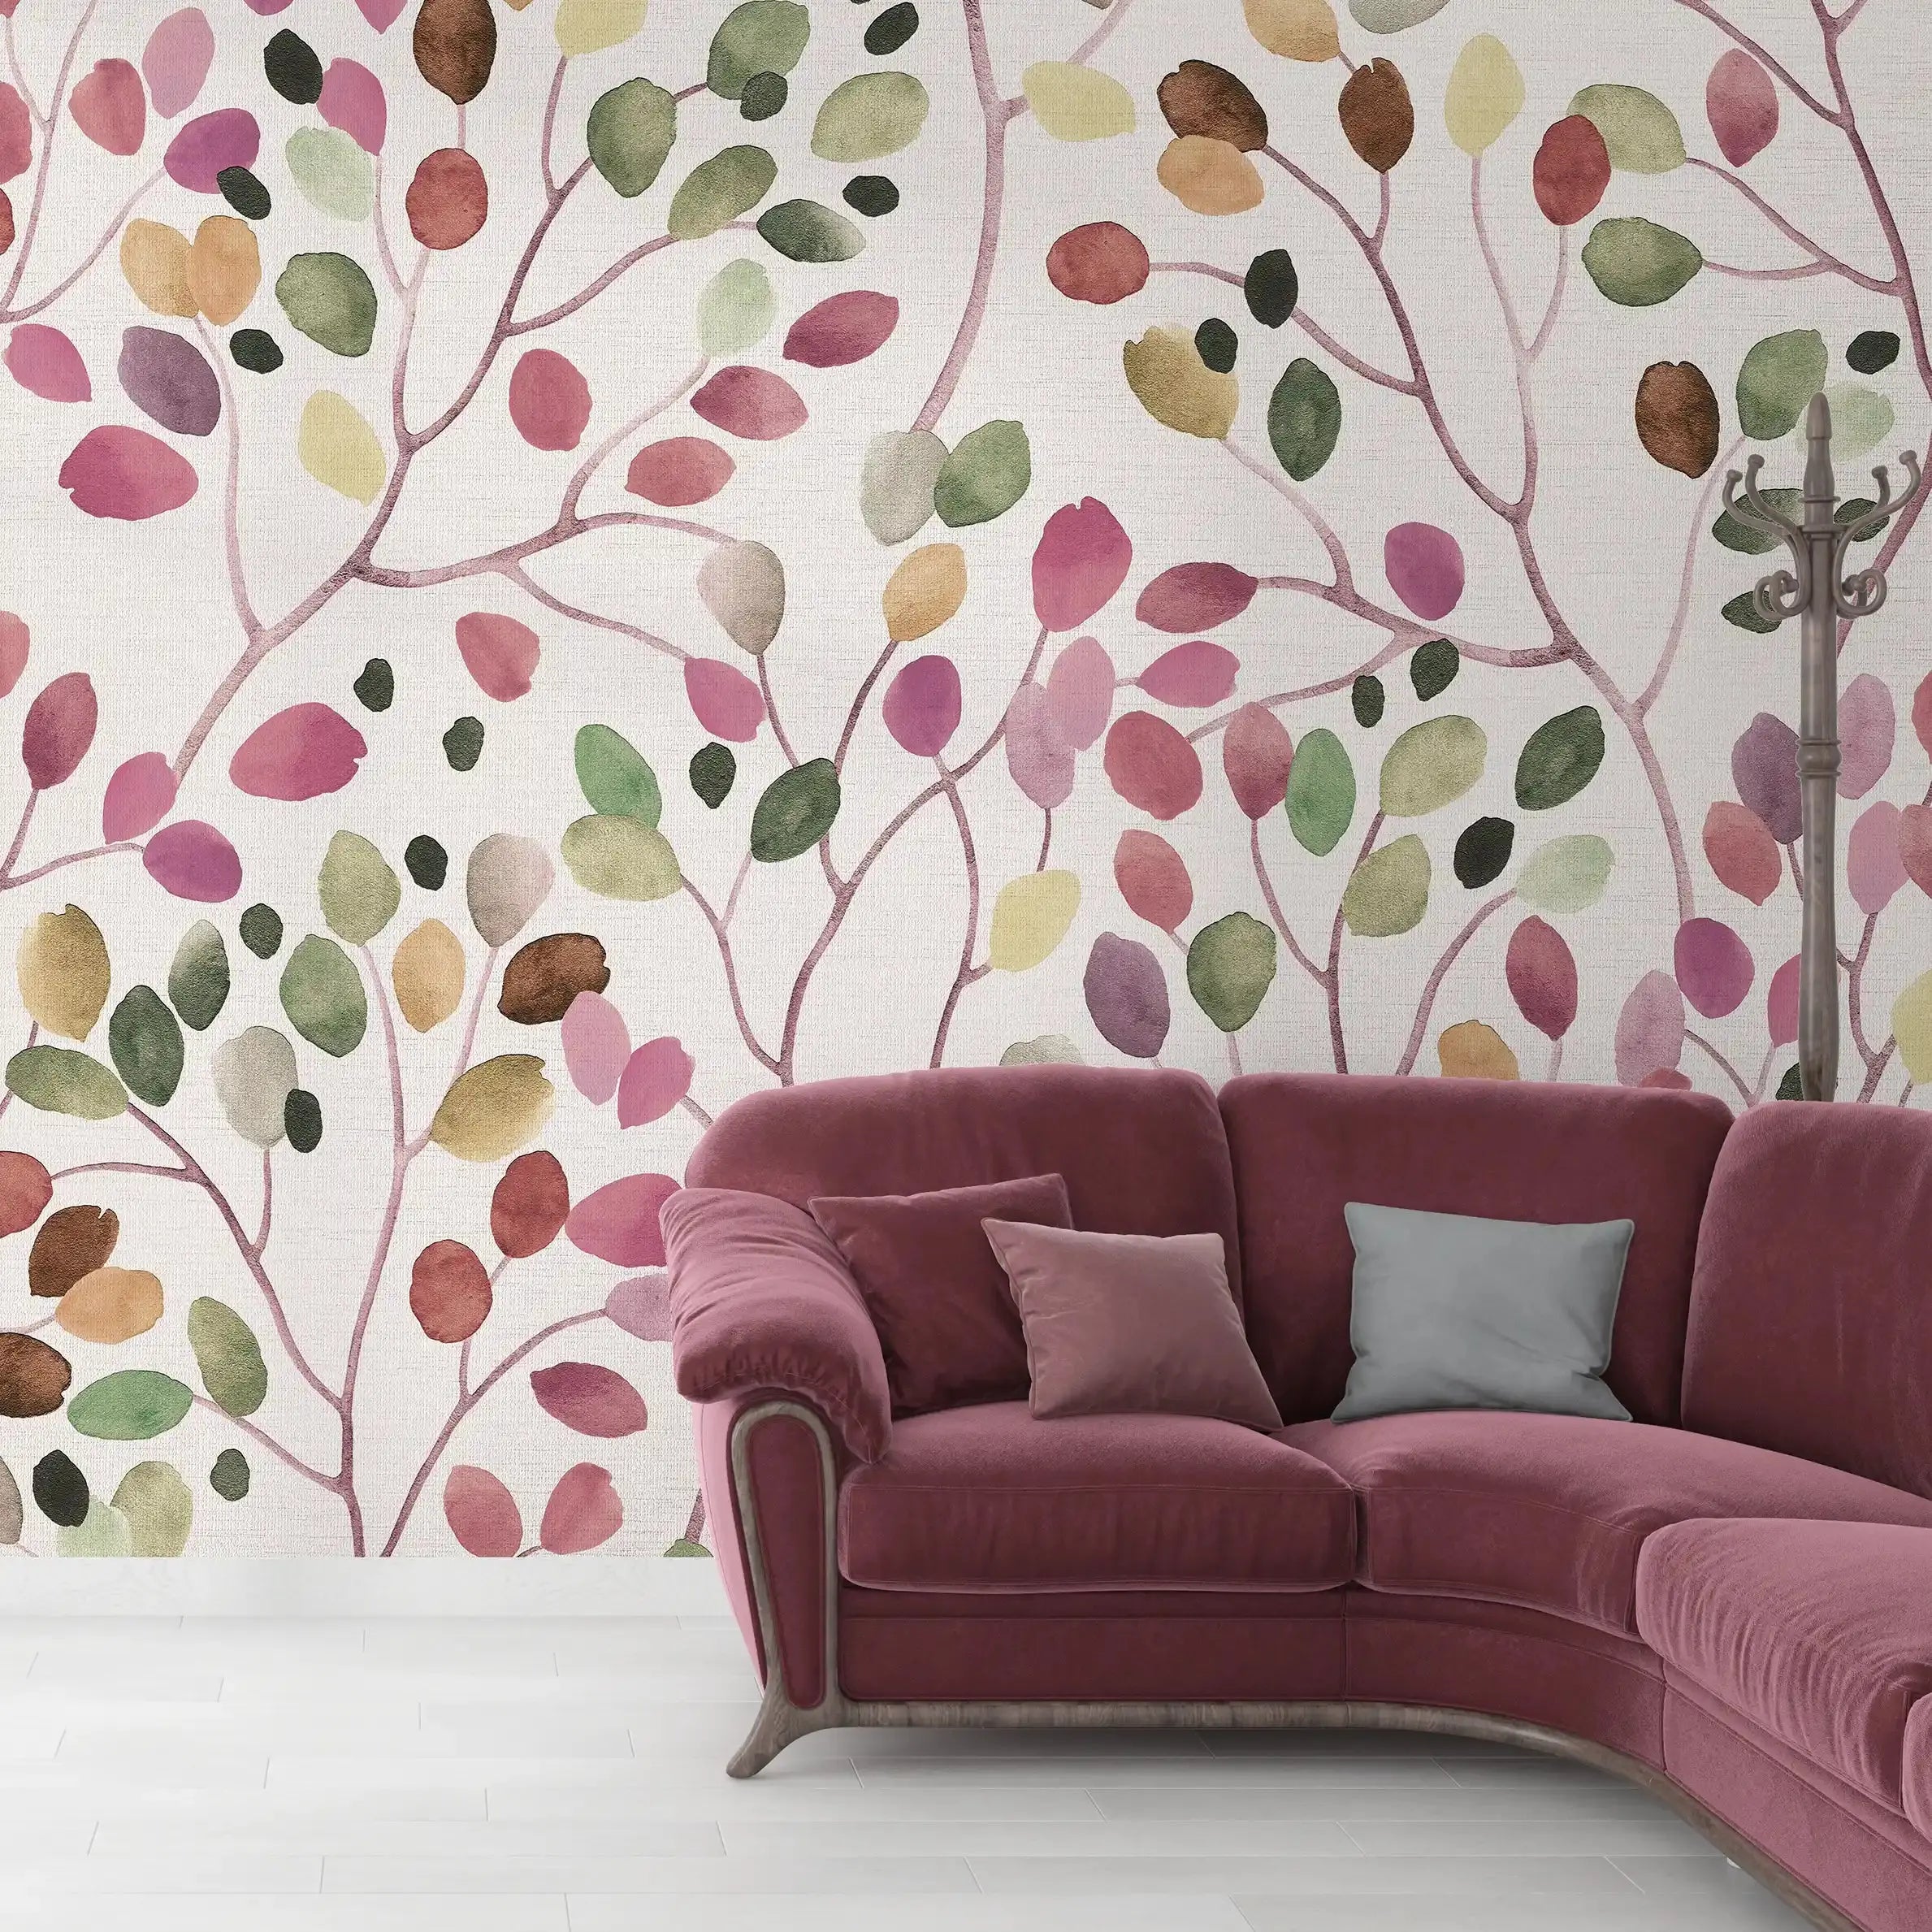 3063-C / Tropical Floral Peel and Stick Wallpaper - Colorful Woodland Branch, Decorative for Accent Wall, Removable and Easy to Install - Artevella